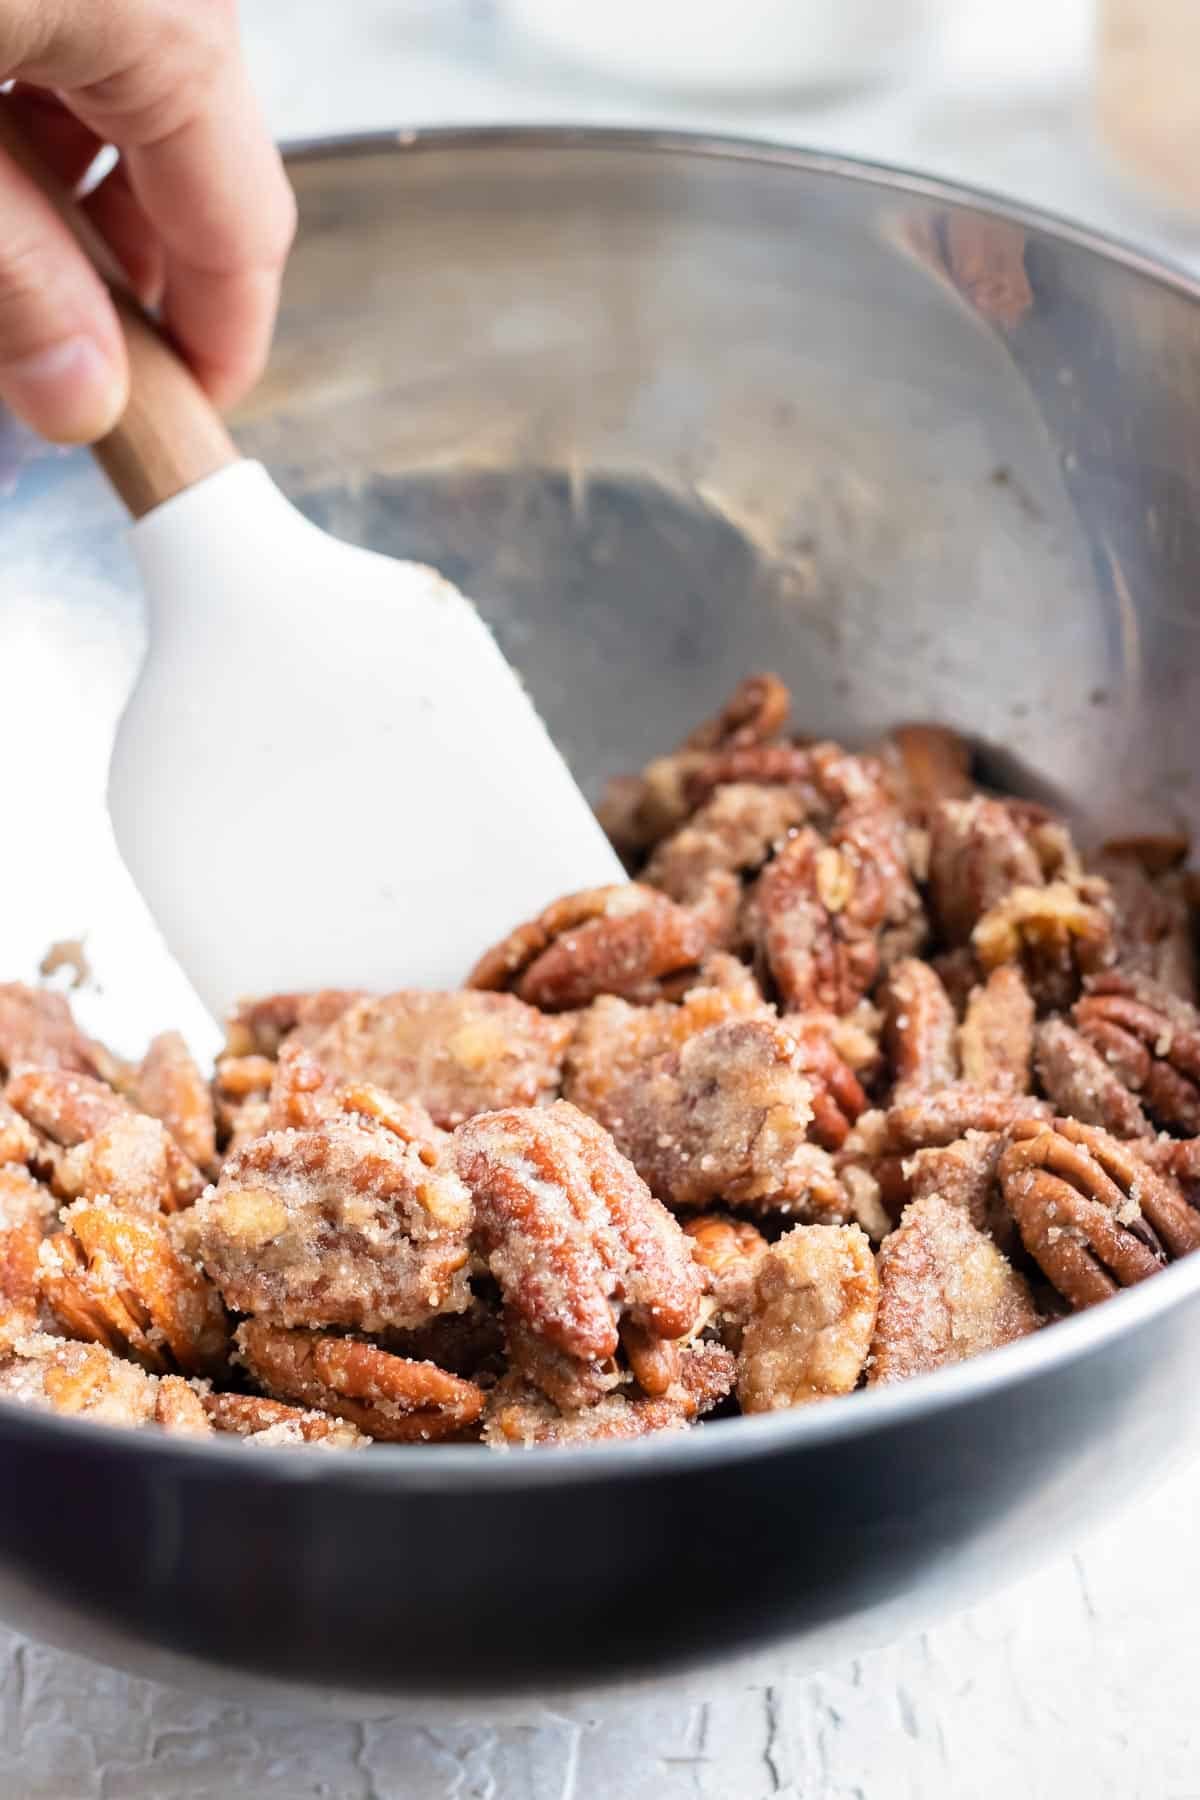 Tossing together cinnamon sugar and pecans for a spiced roasted pecans recipe.